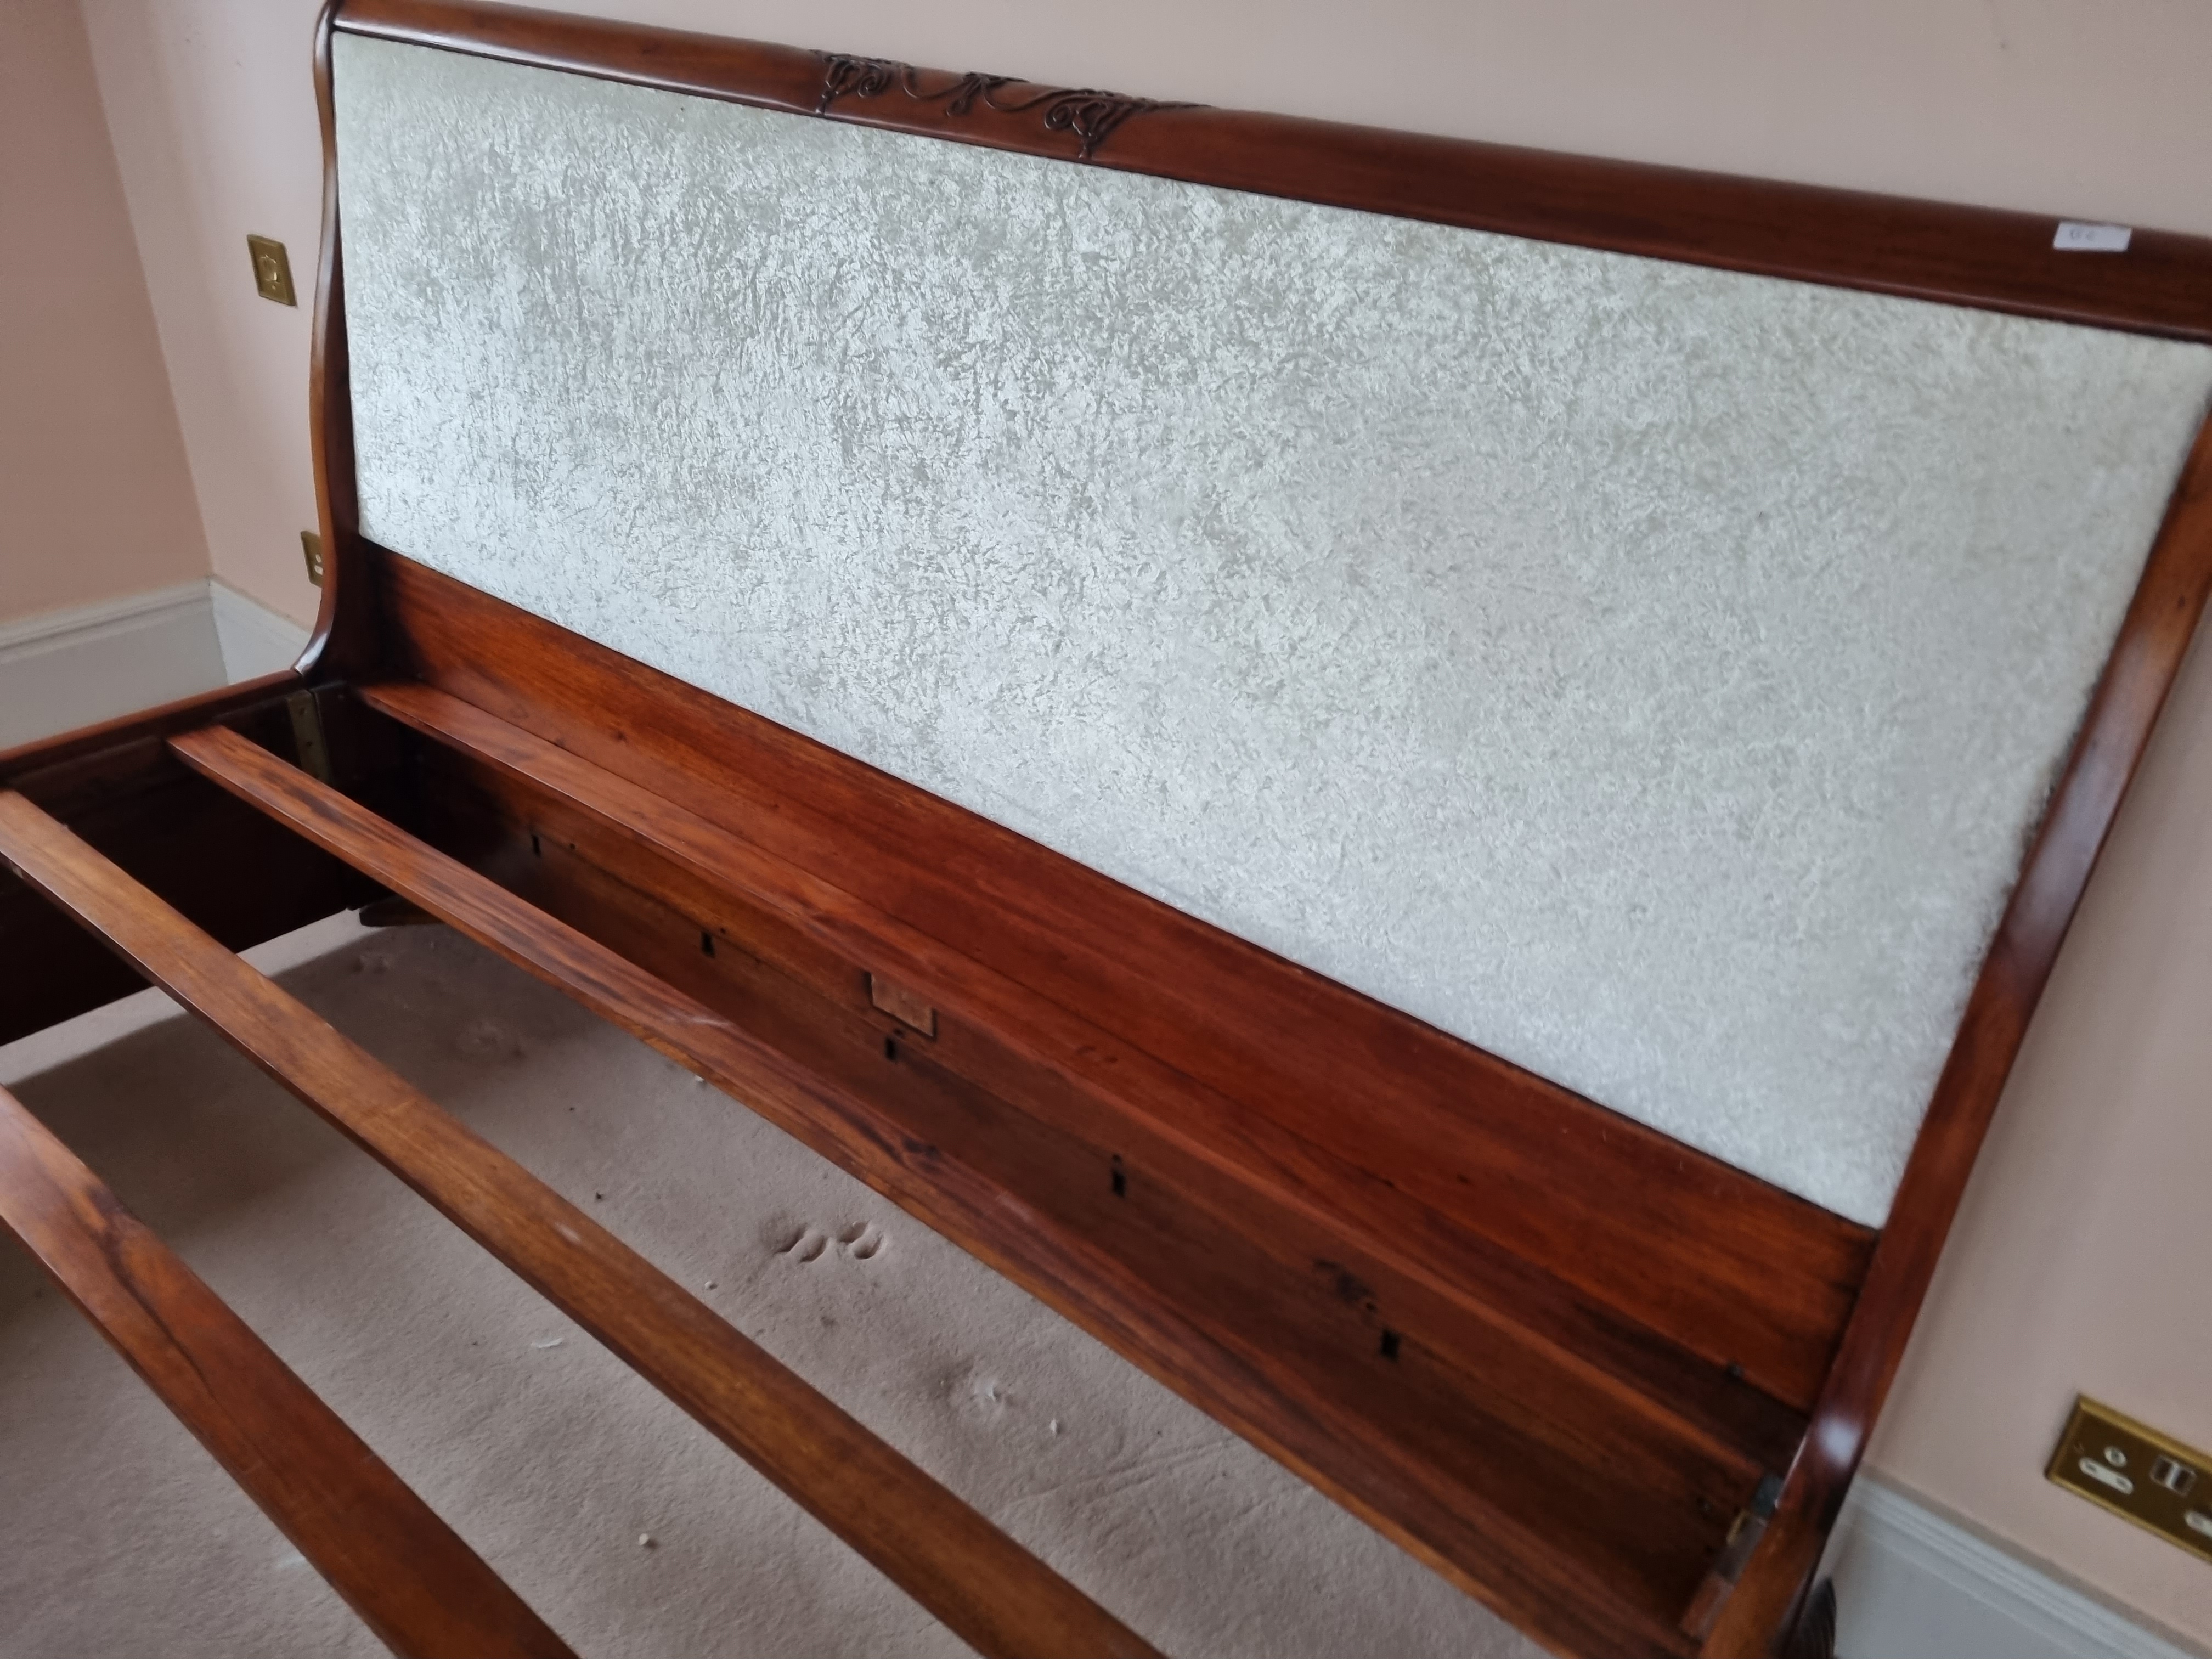 Mahogany sleigh bed with fabric headboard - Image 3 of 5